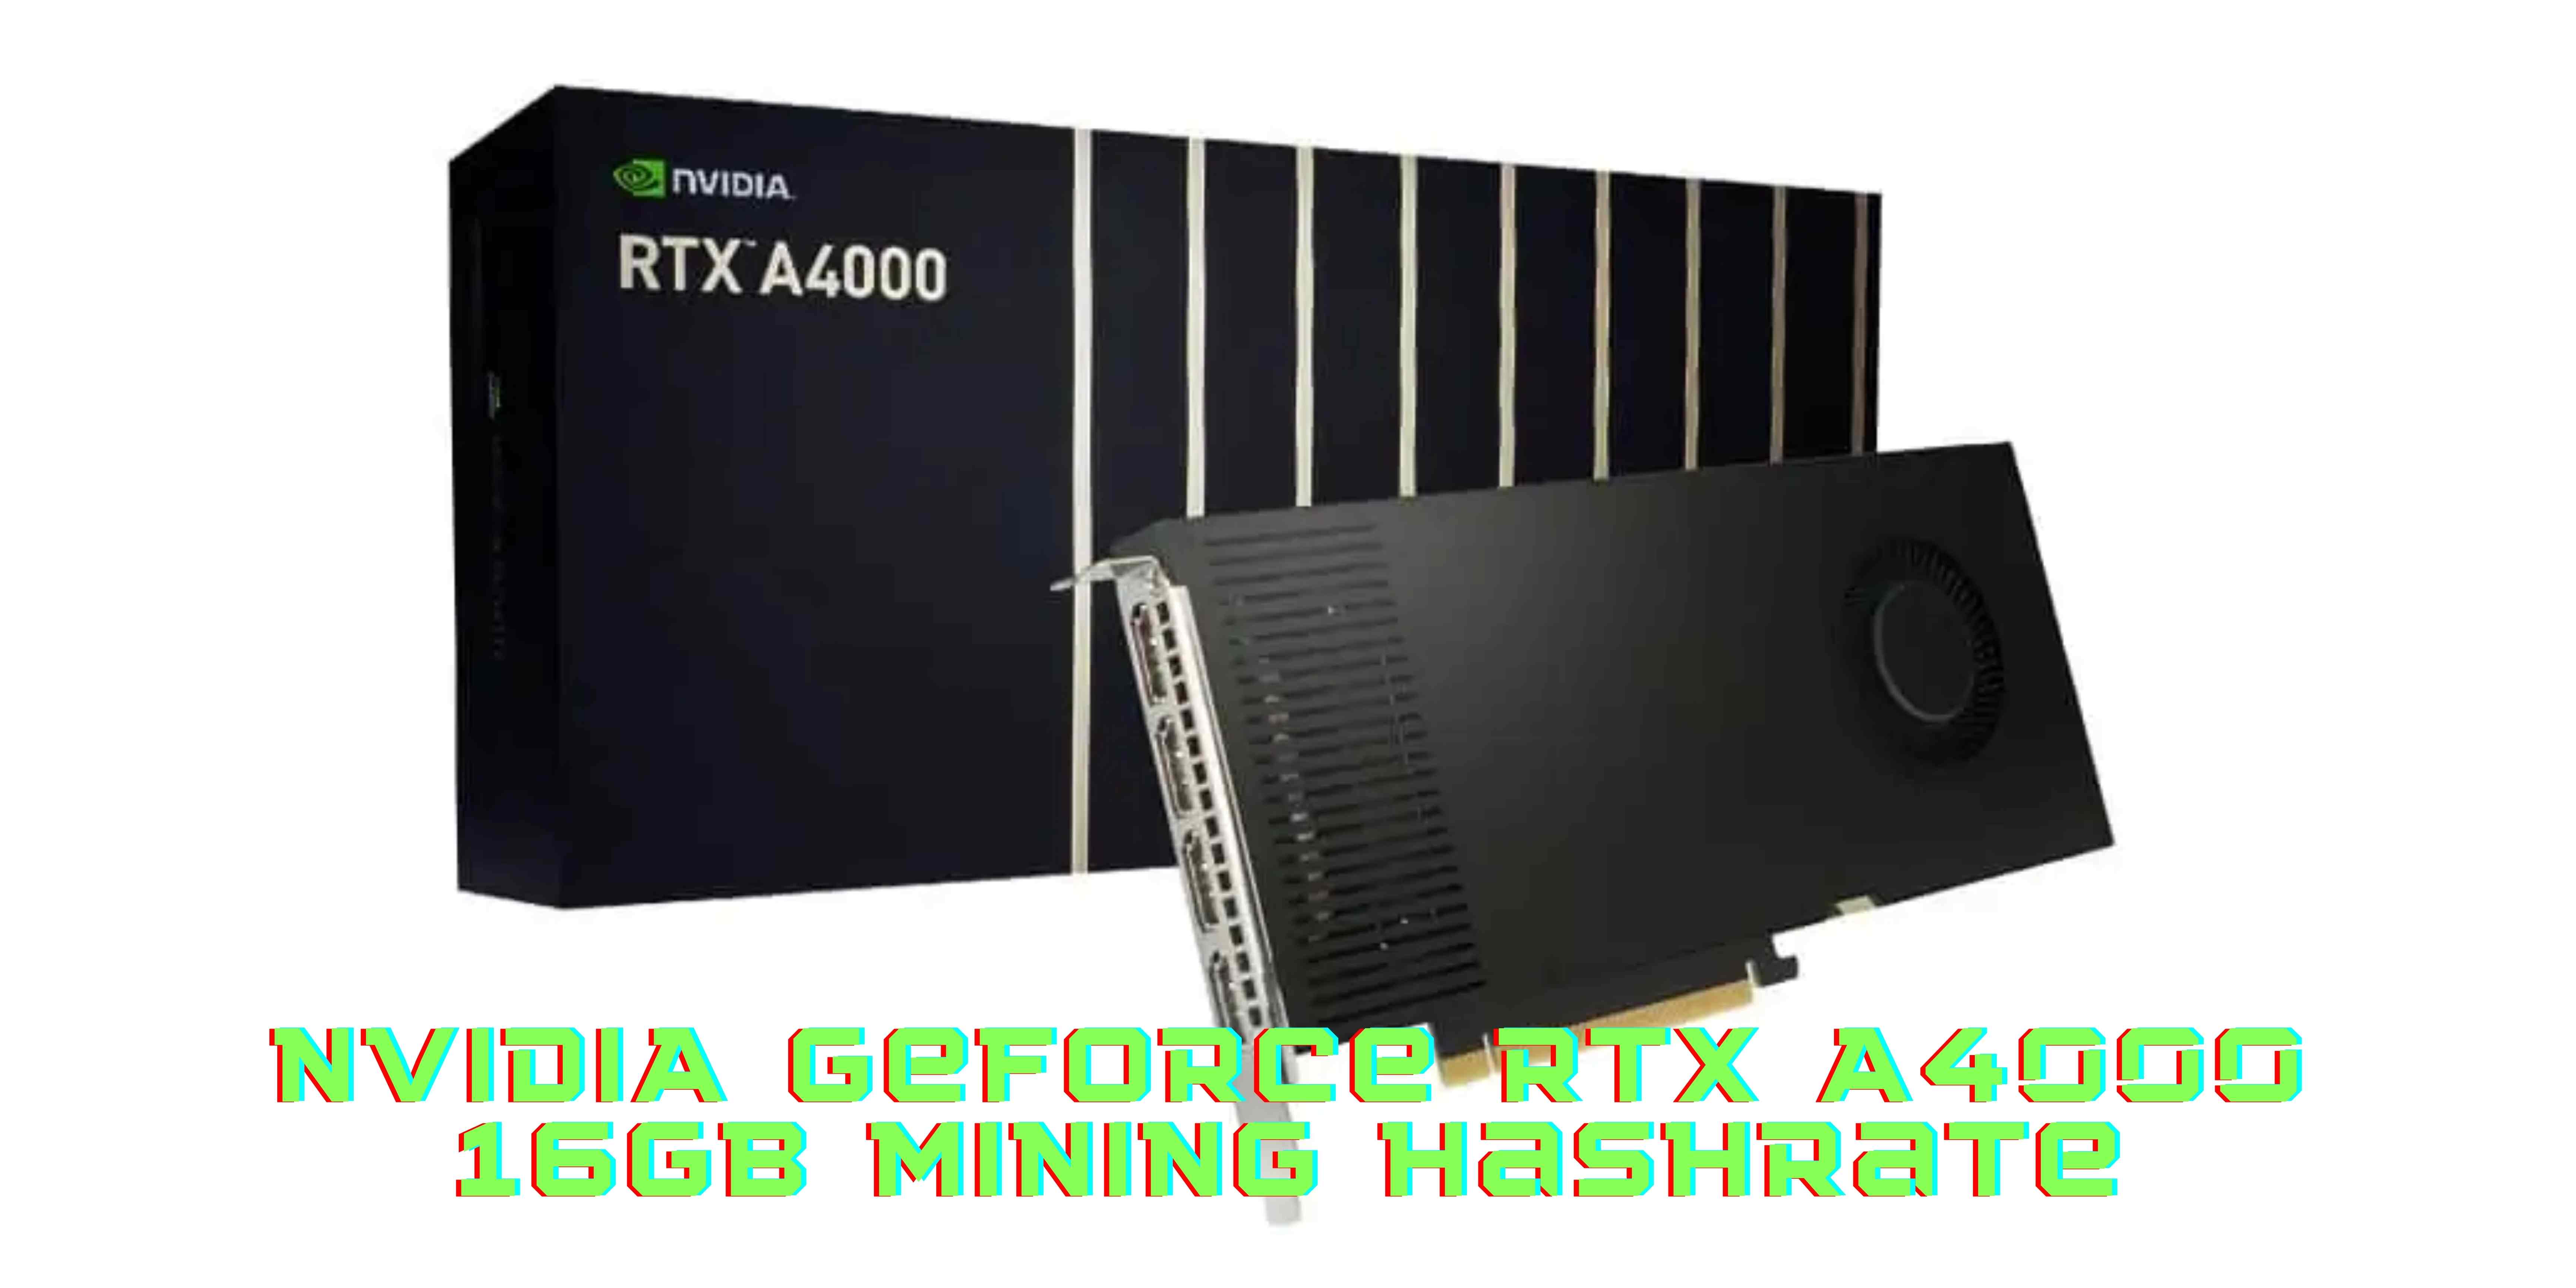 The NVIDIA RTX A4000 16GB Mining Hashrate - Is It Worth Buying?